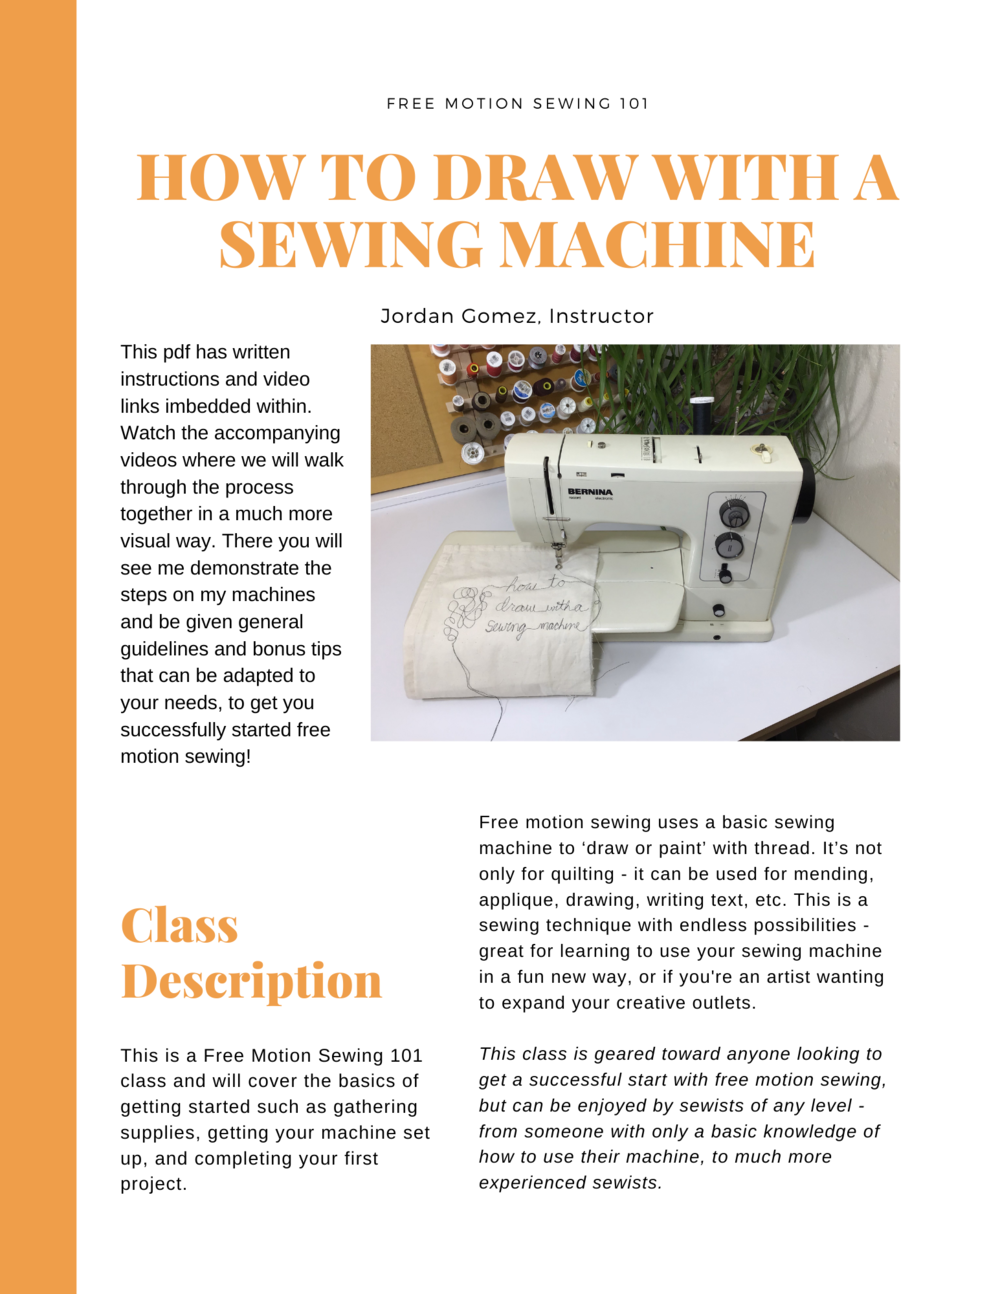 How To Draw With A Sewing Machine - Online Sewing Course — Jordan Gomez